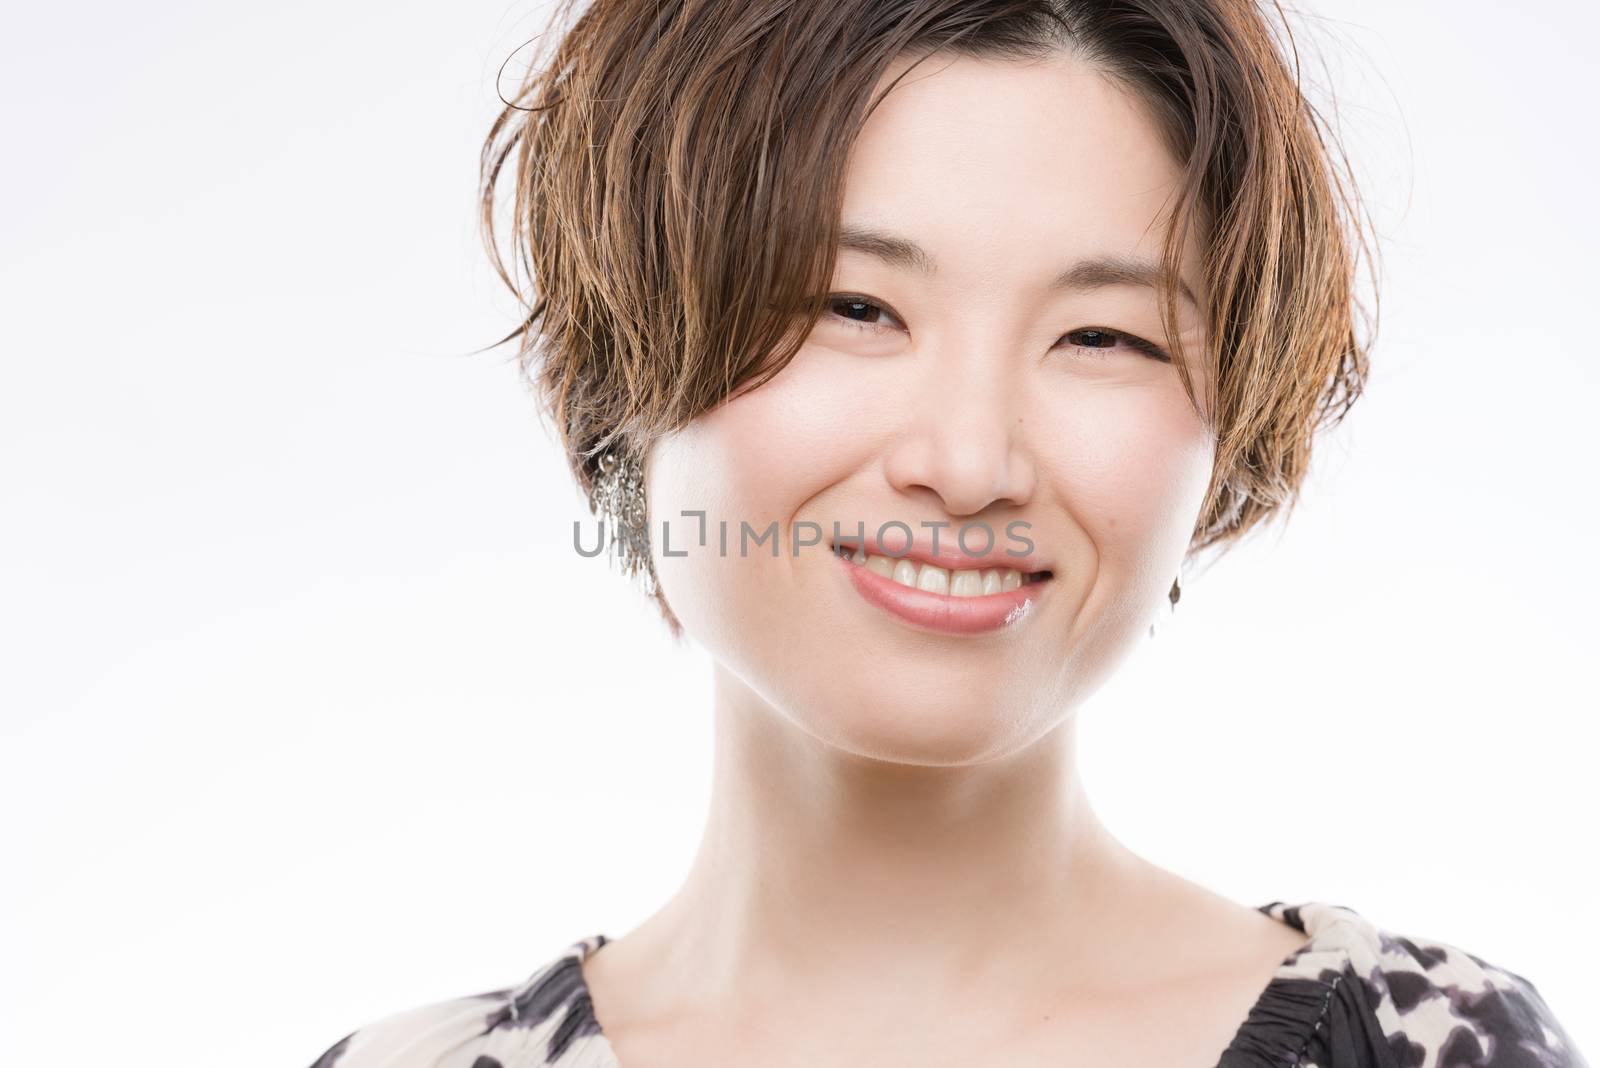 A high key headshot of a smiling, beautiful and young Japanese woman on a white background.